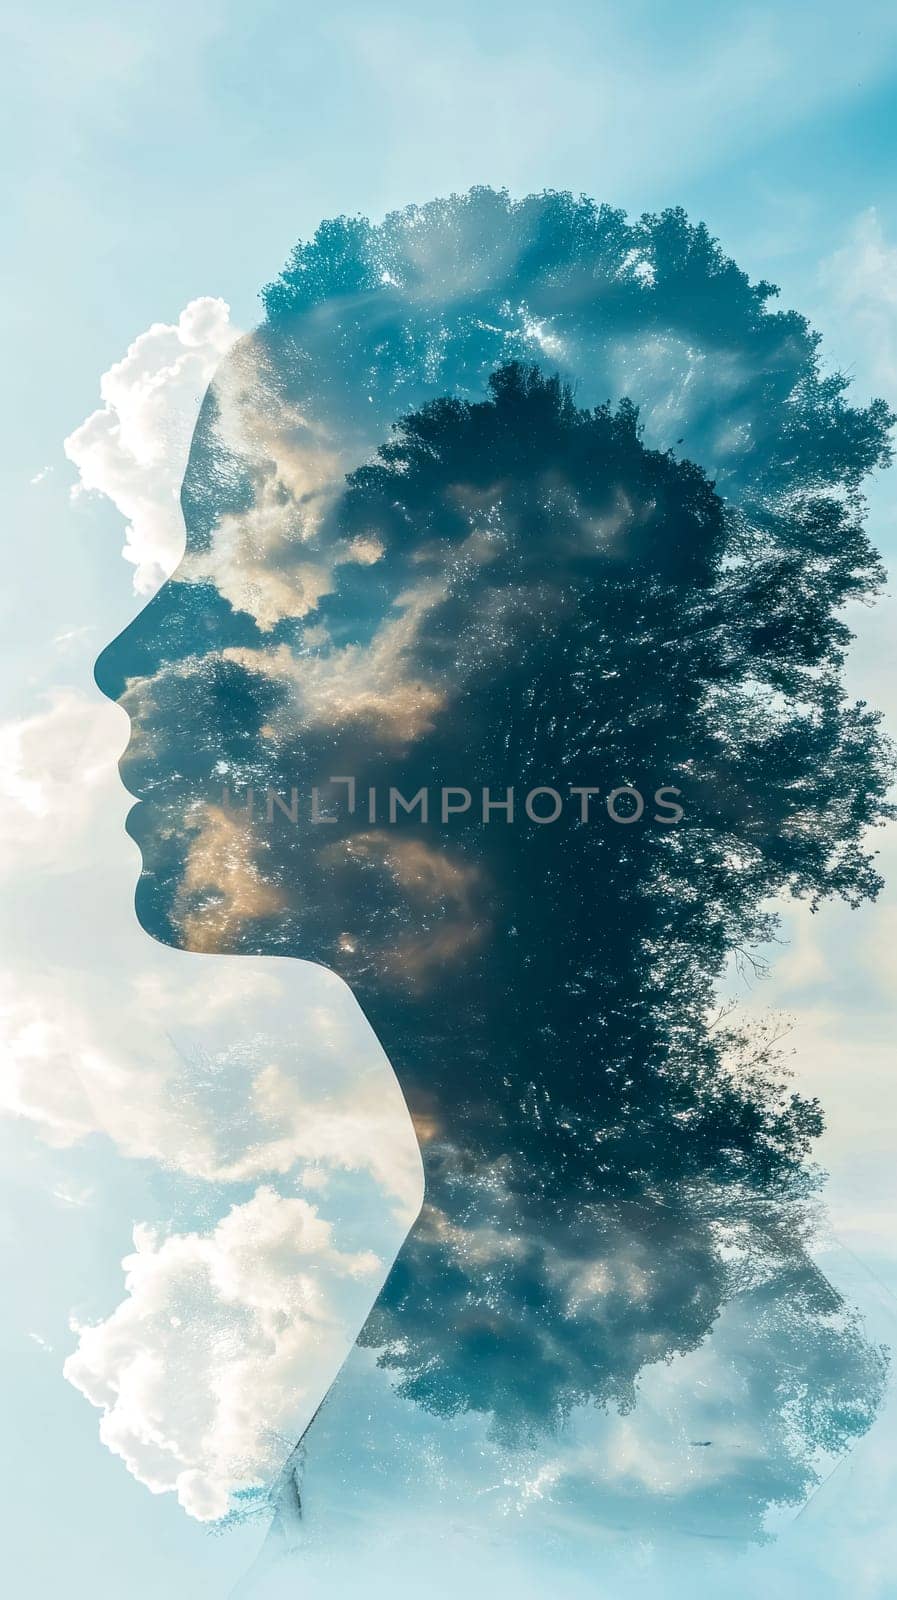 A double exposure image blending a human silhouette with a tree and cloudscape. by Edophoto